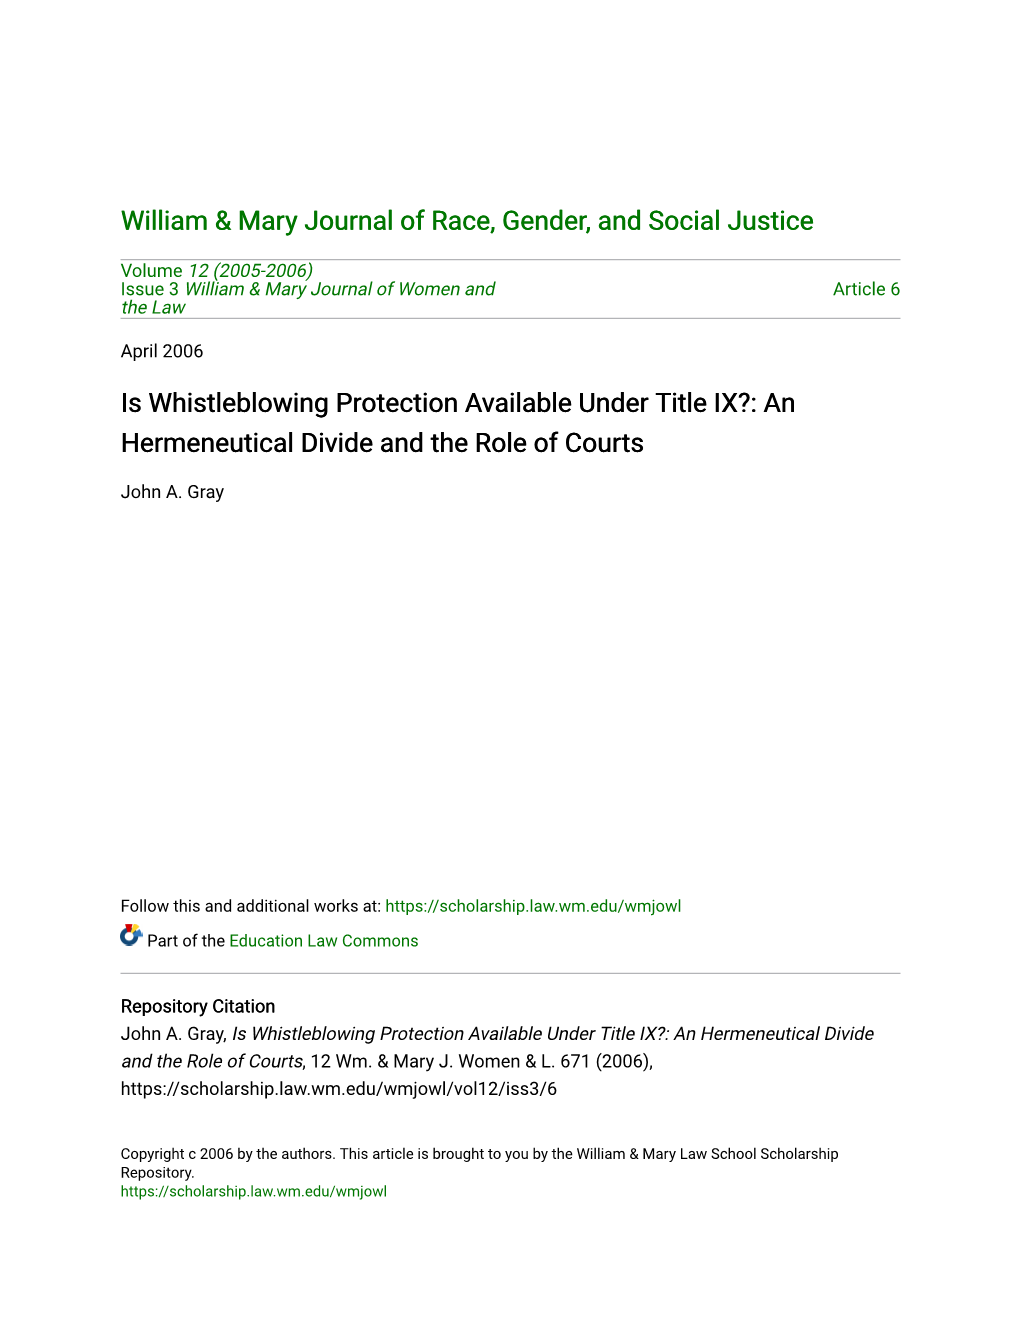 Is Whistleblowing Protection Available Under Title IX?: an Hermeneutical Divide and the Role of Courts